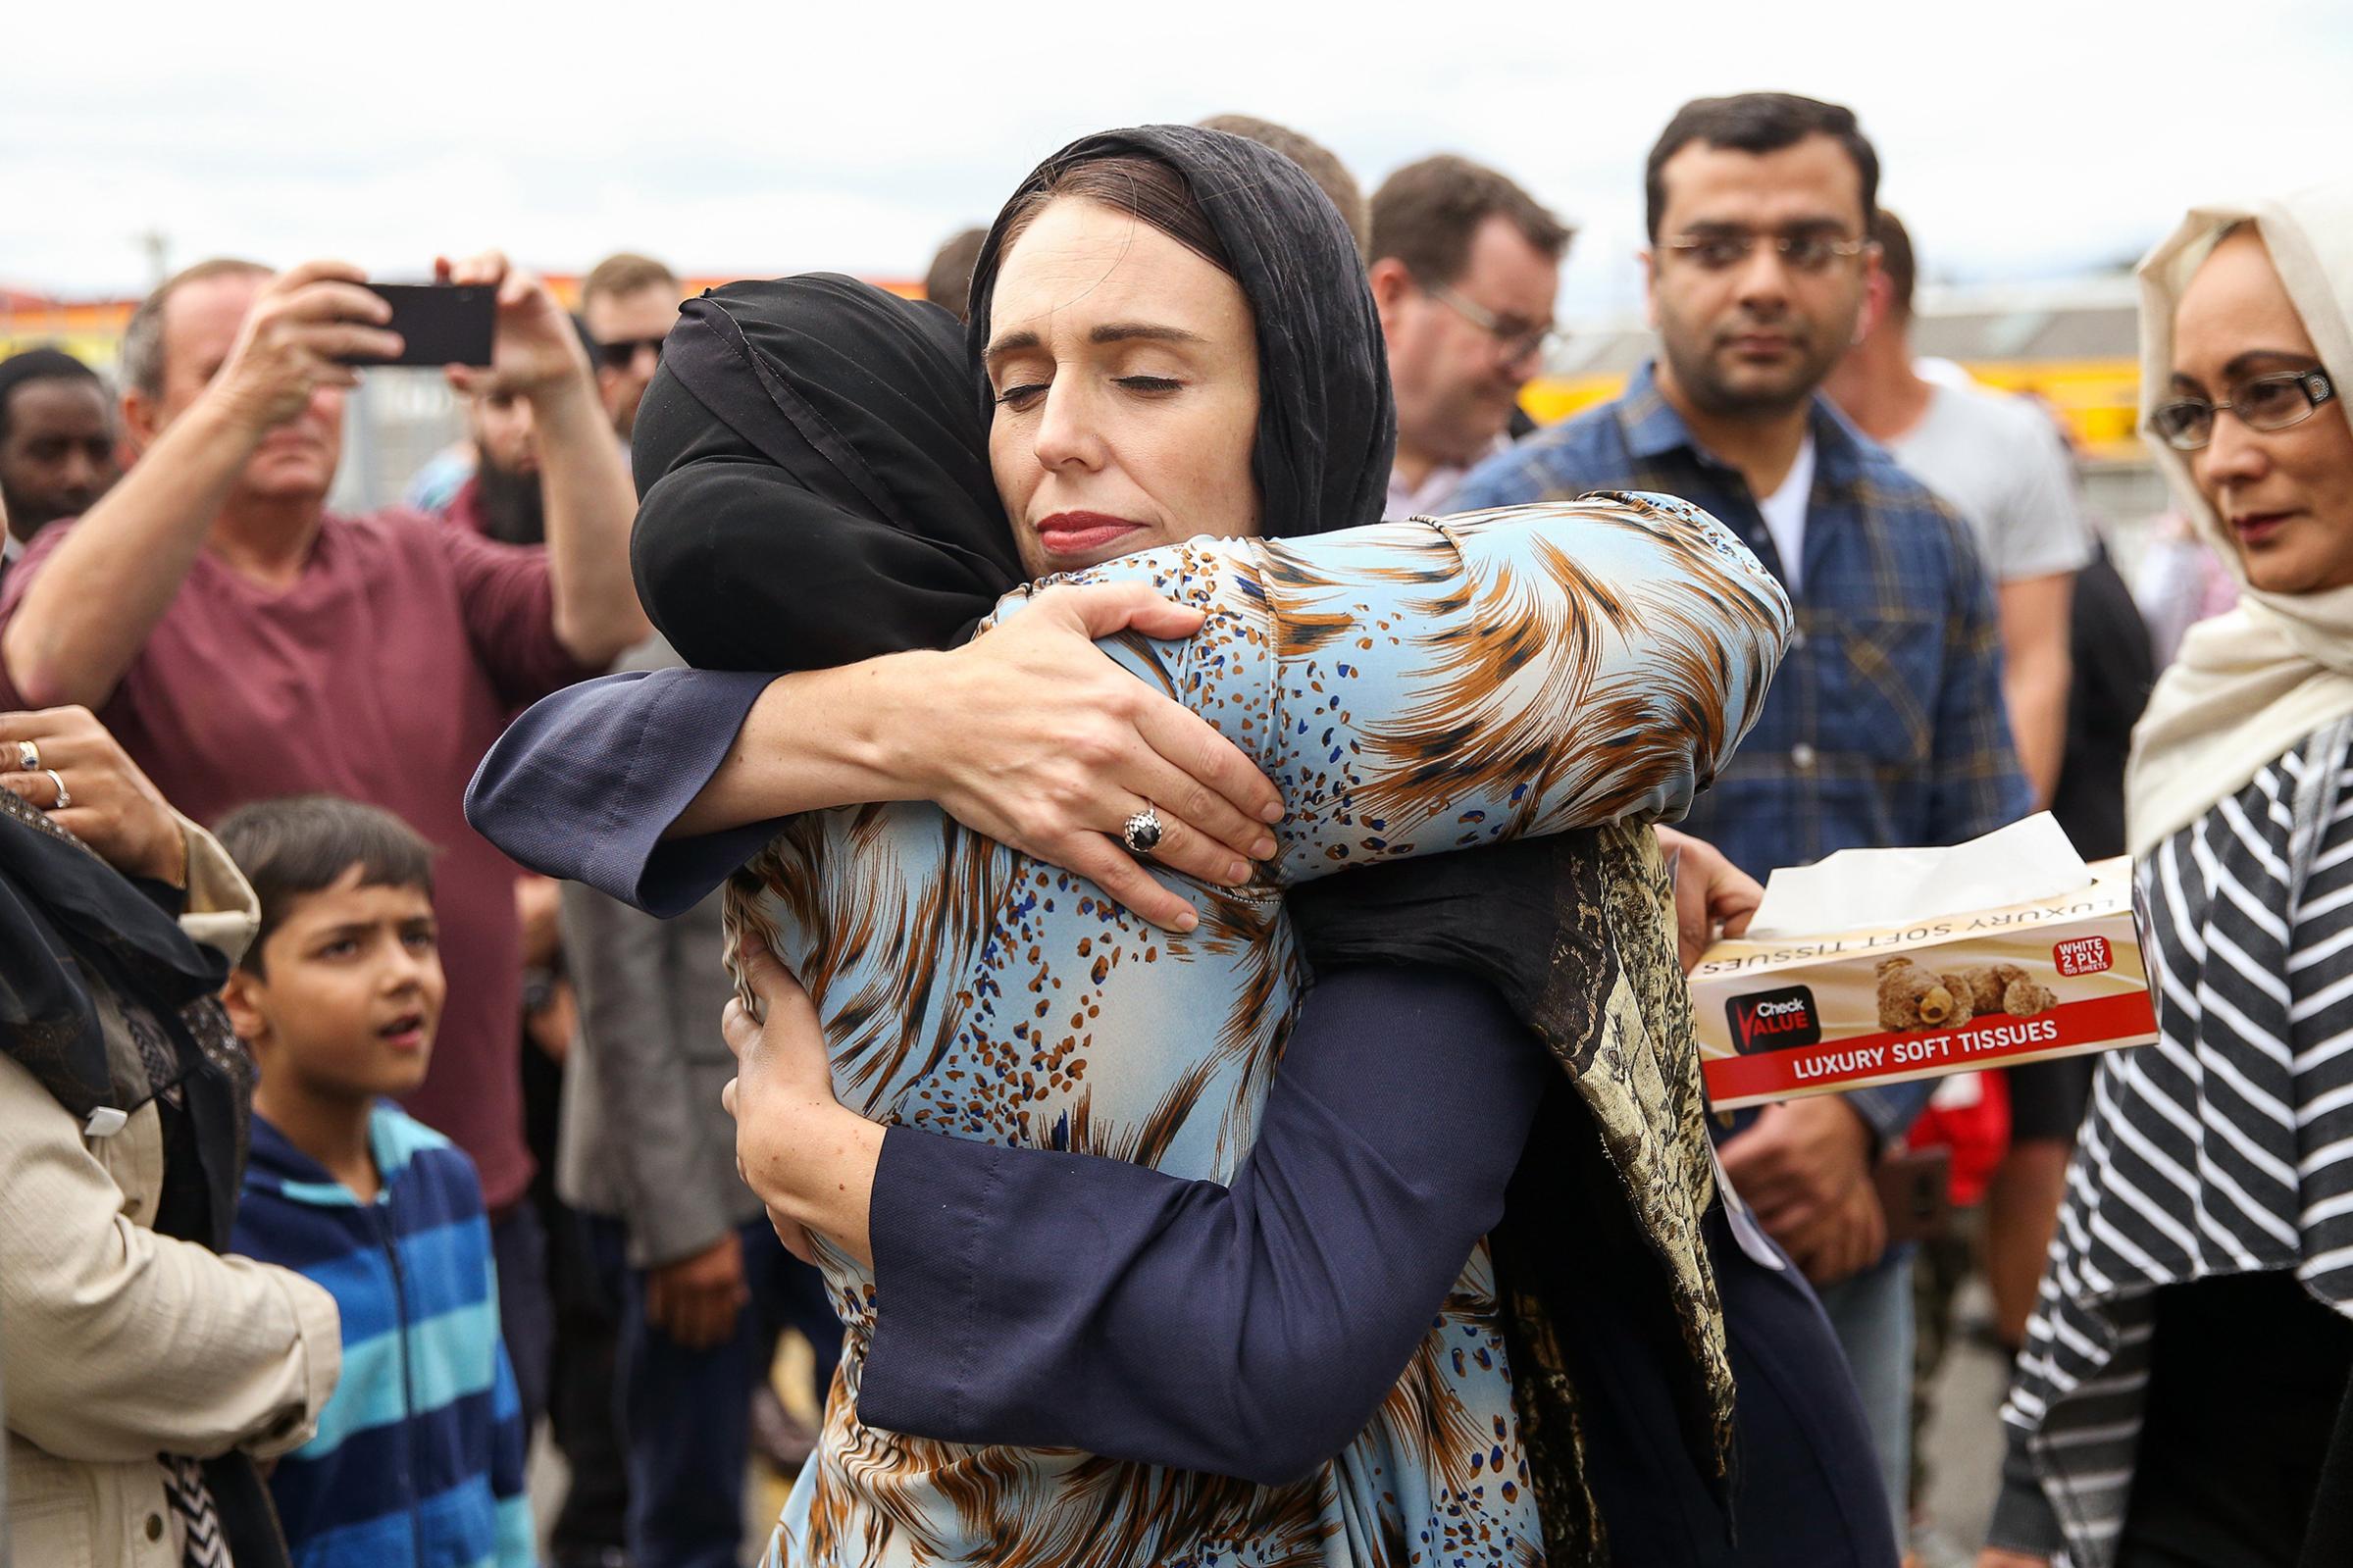 New Zealand Prime Minister Jacinda Ardern hugs a worshipper at Kilbirnie Mosque in Wellington two days after the attacks